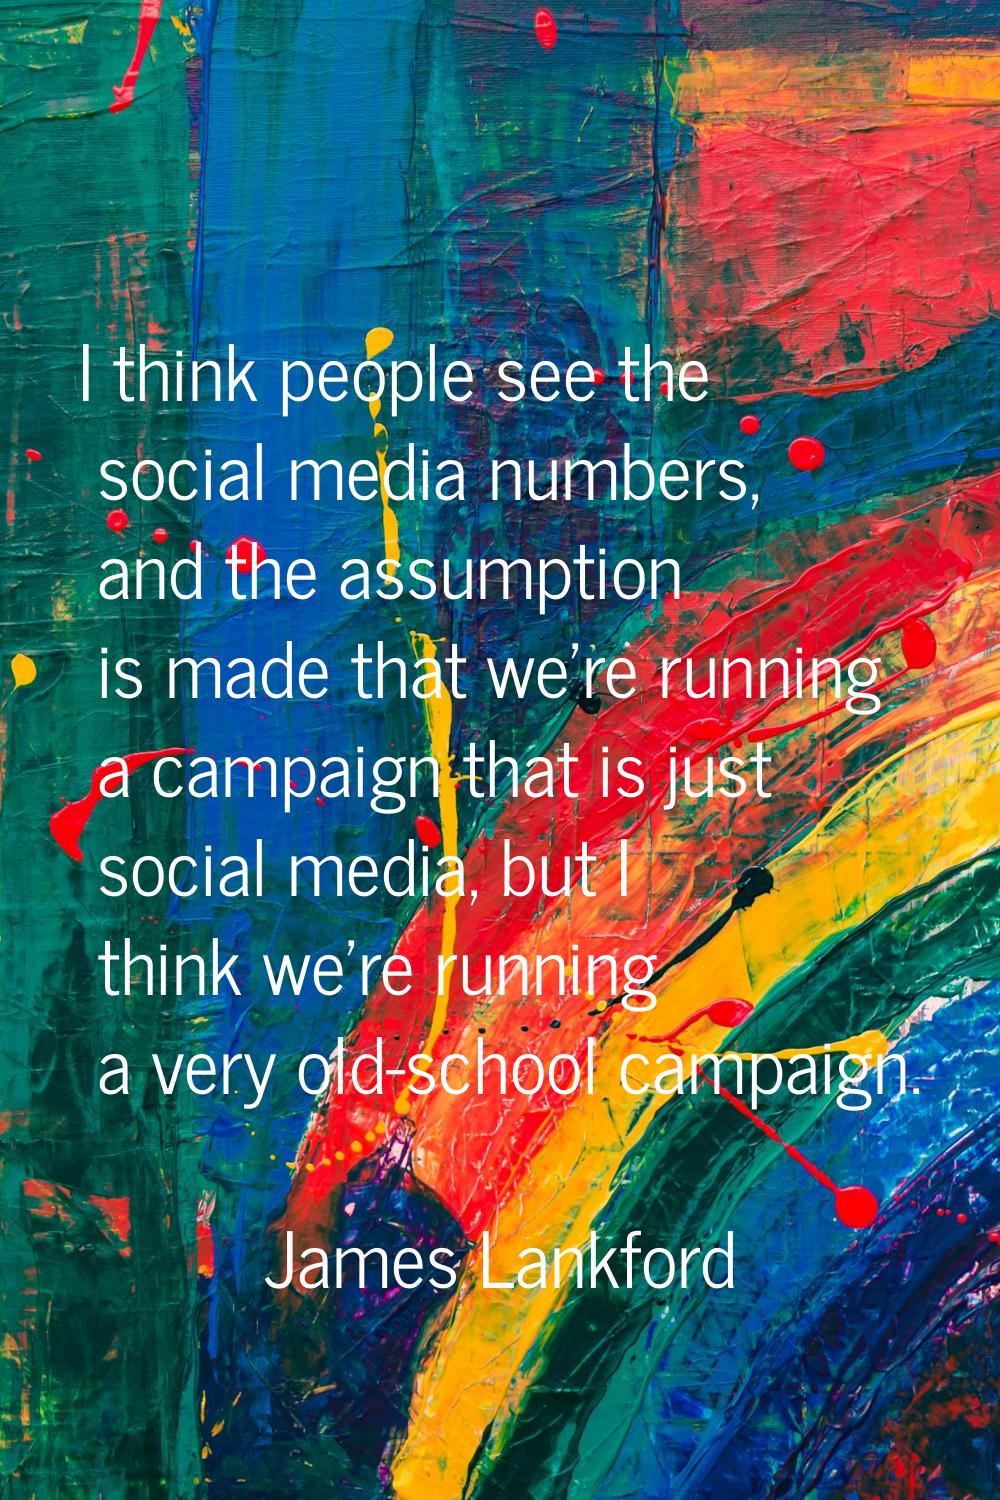 I think people see the social media numbers, and the assumption is made that we're running a campai